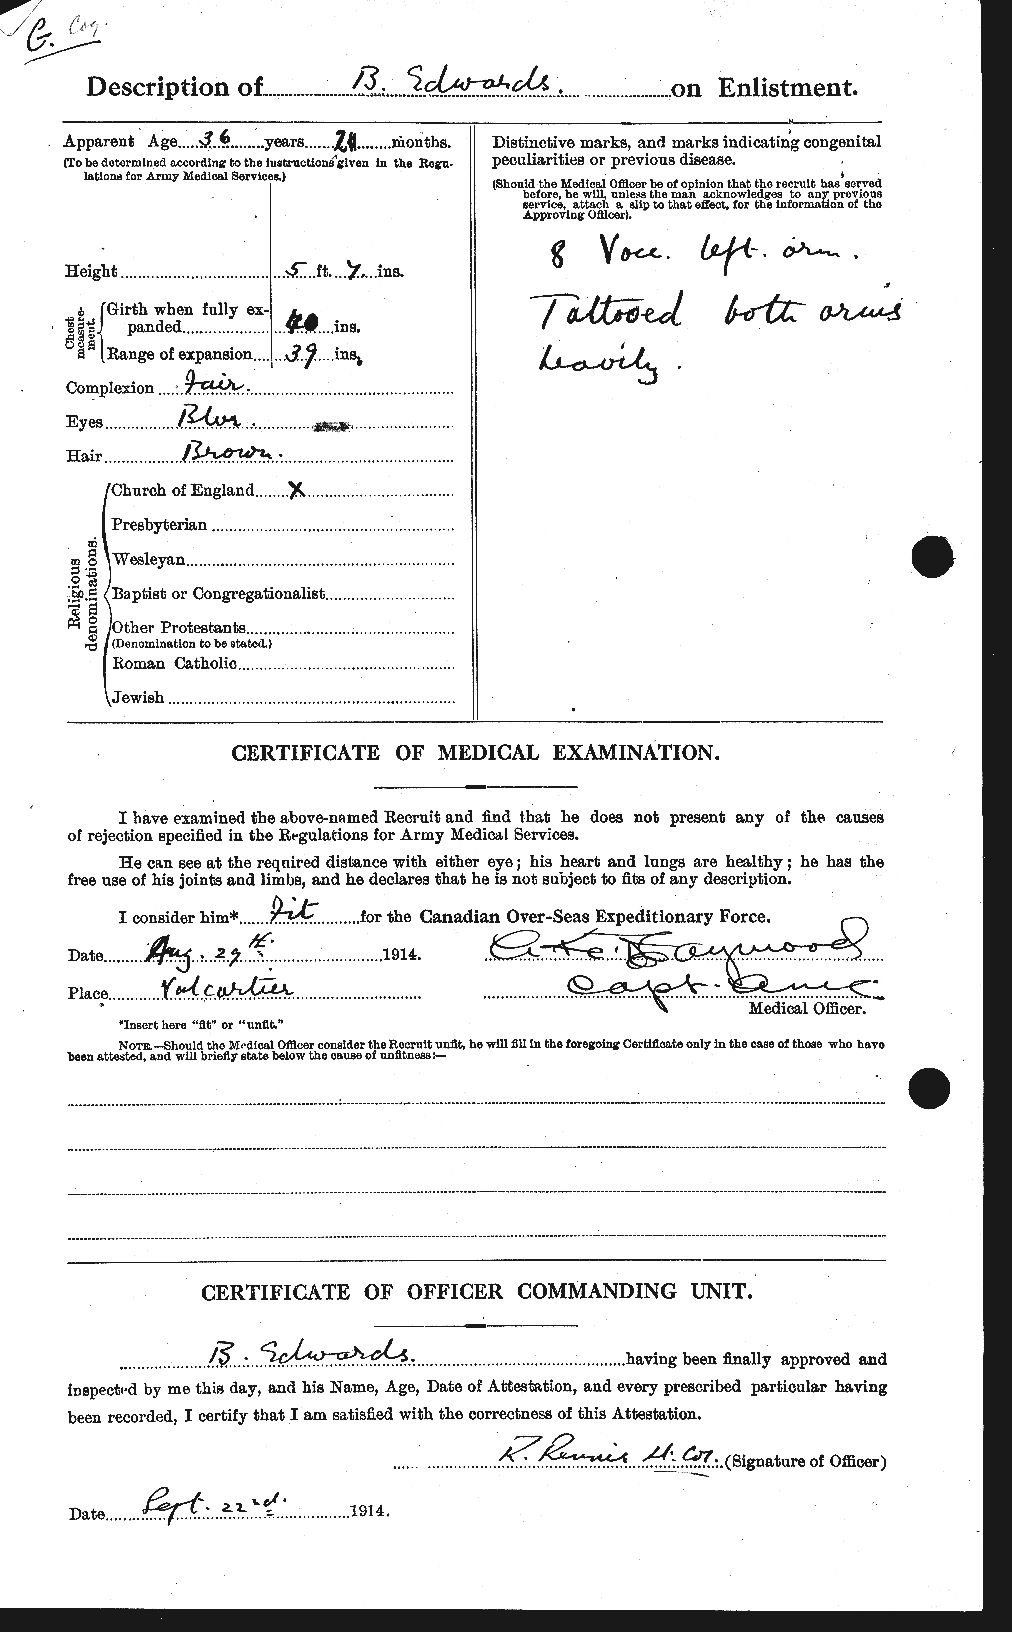 Personnel Records of the First World War - CEF 313152b